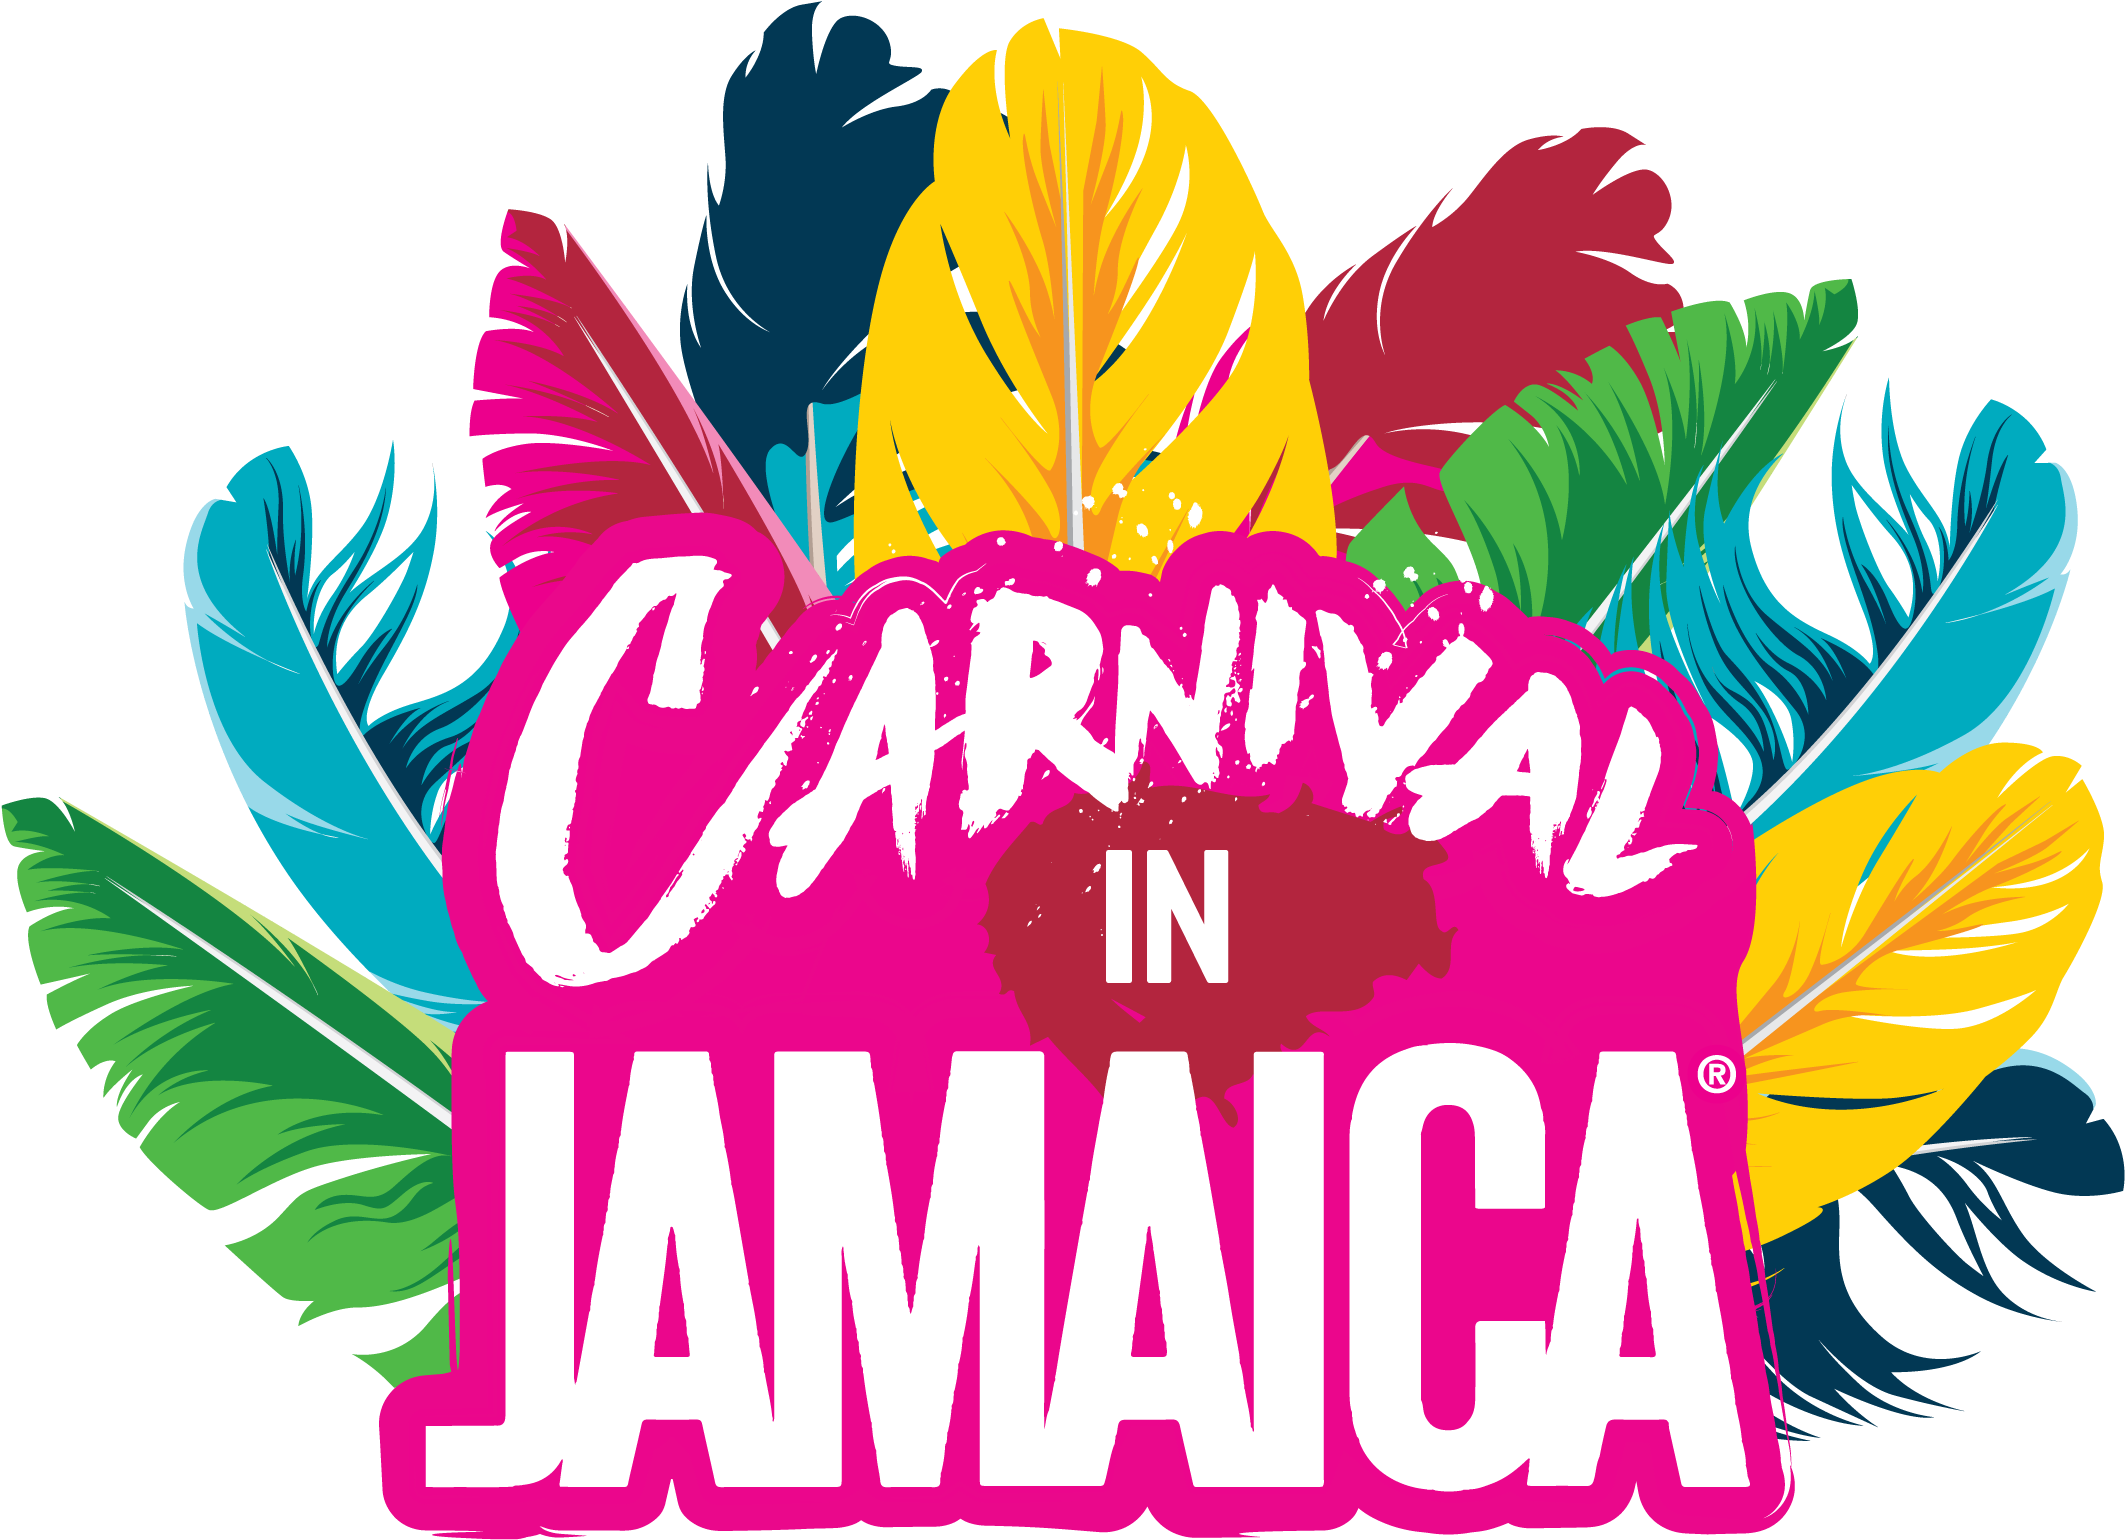 Sports & Entertainment - Carnival In Jamaica (2520x2016)